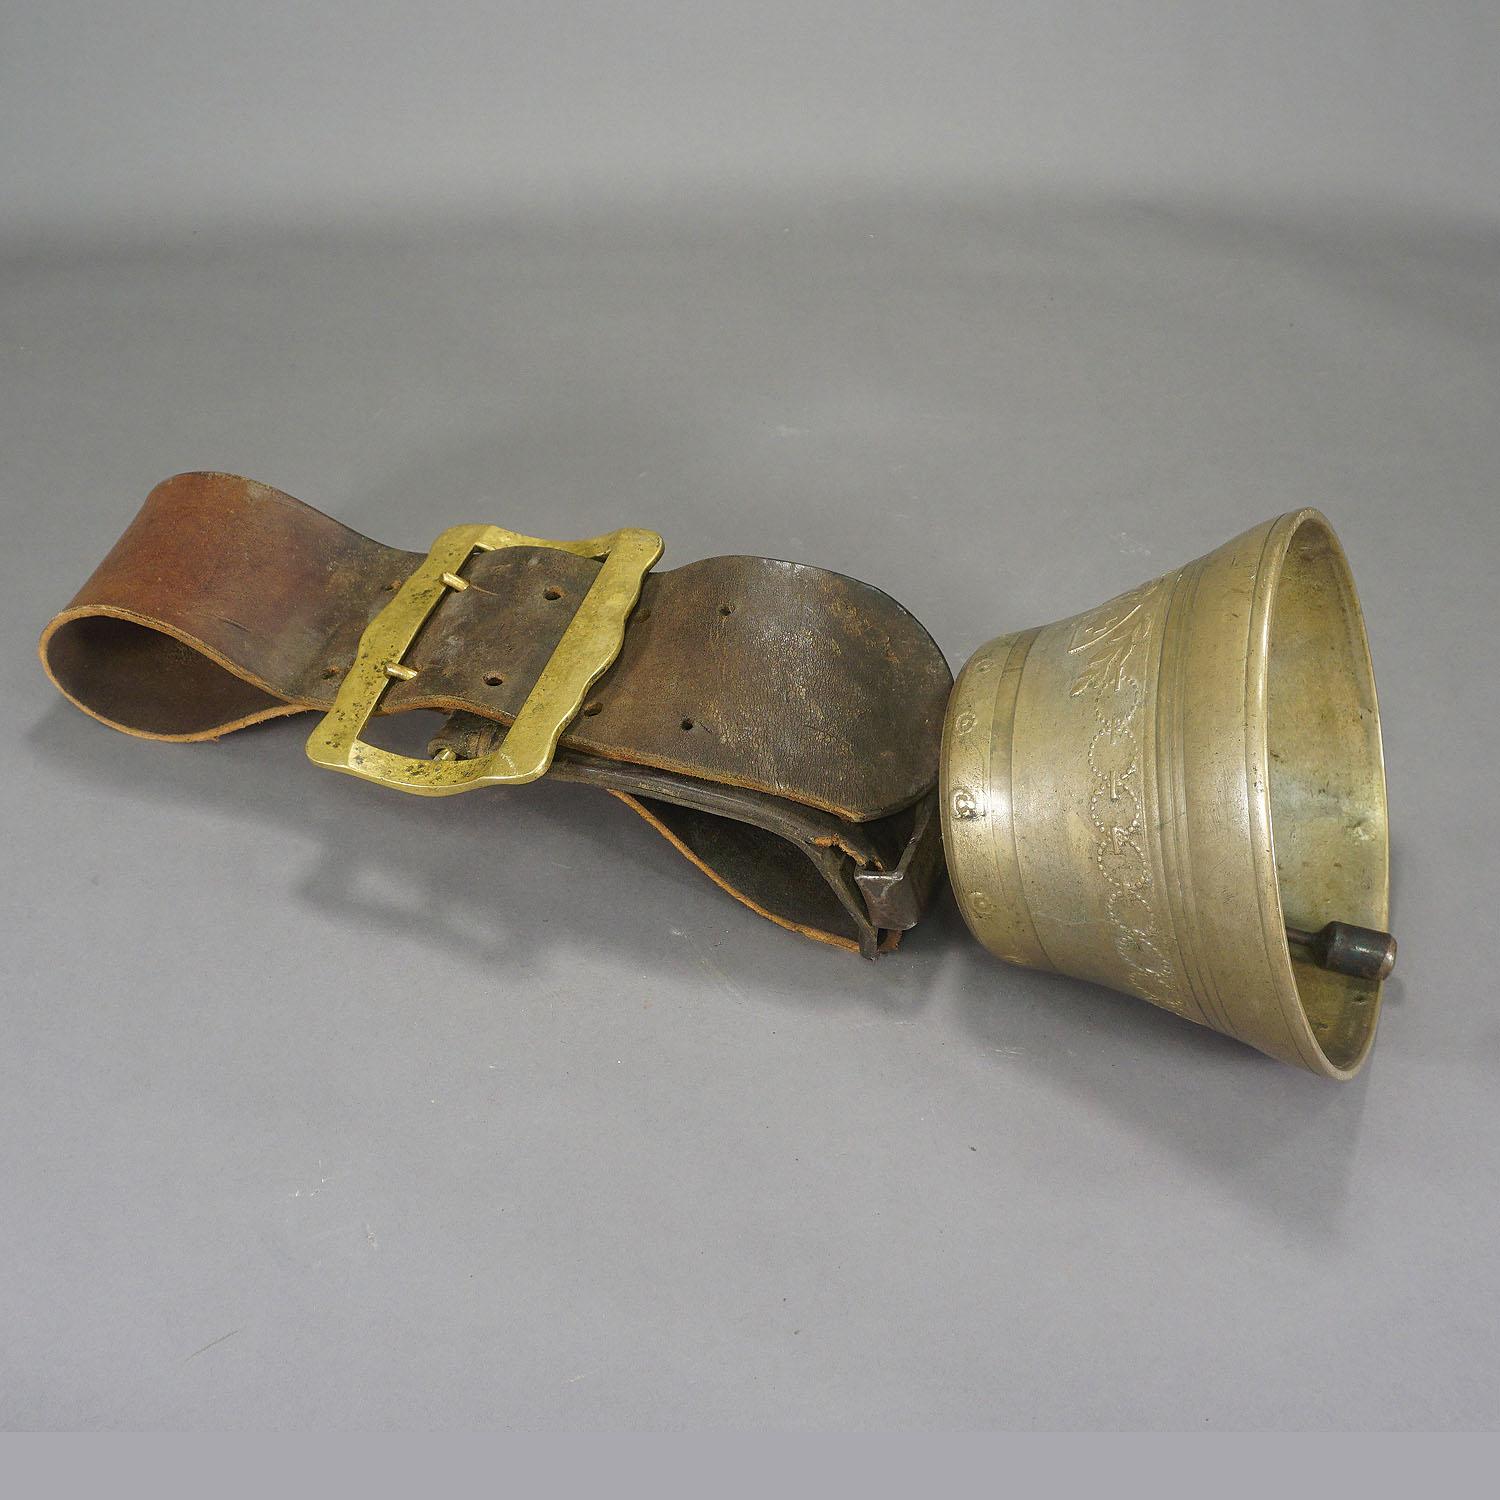 A great casted bronze cow bell from the alps region of Switzerland. The antique bell was manufactured around 1900 and features floral high relief motifs and foundy mark. The bell still has its original brown leather strap with buckle. These bells